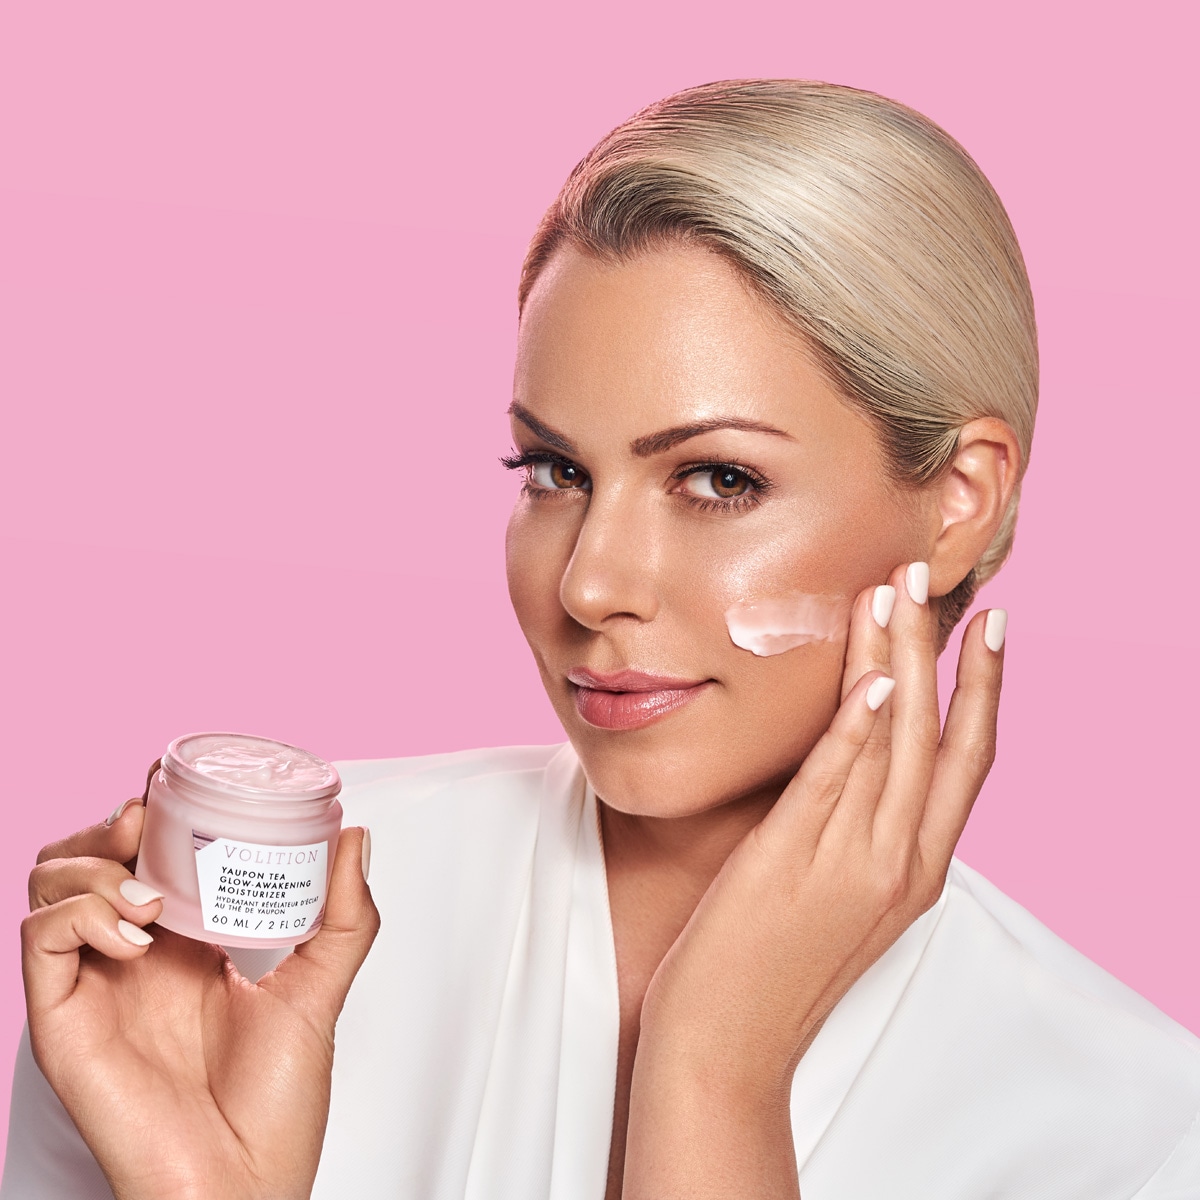 Hurry! You Can Now Shop Maryse's Knockout Moisturizer at Ulta